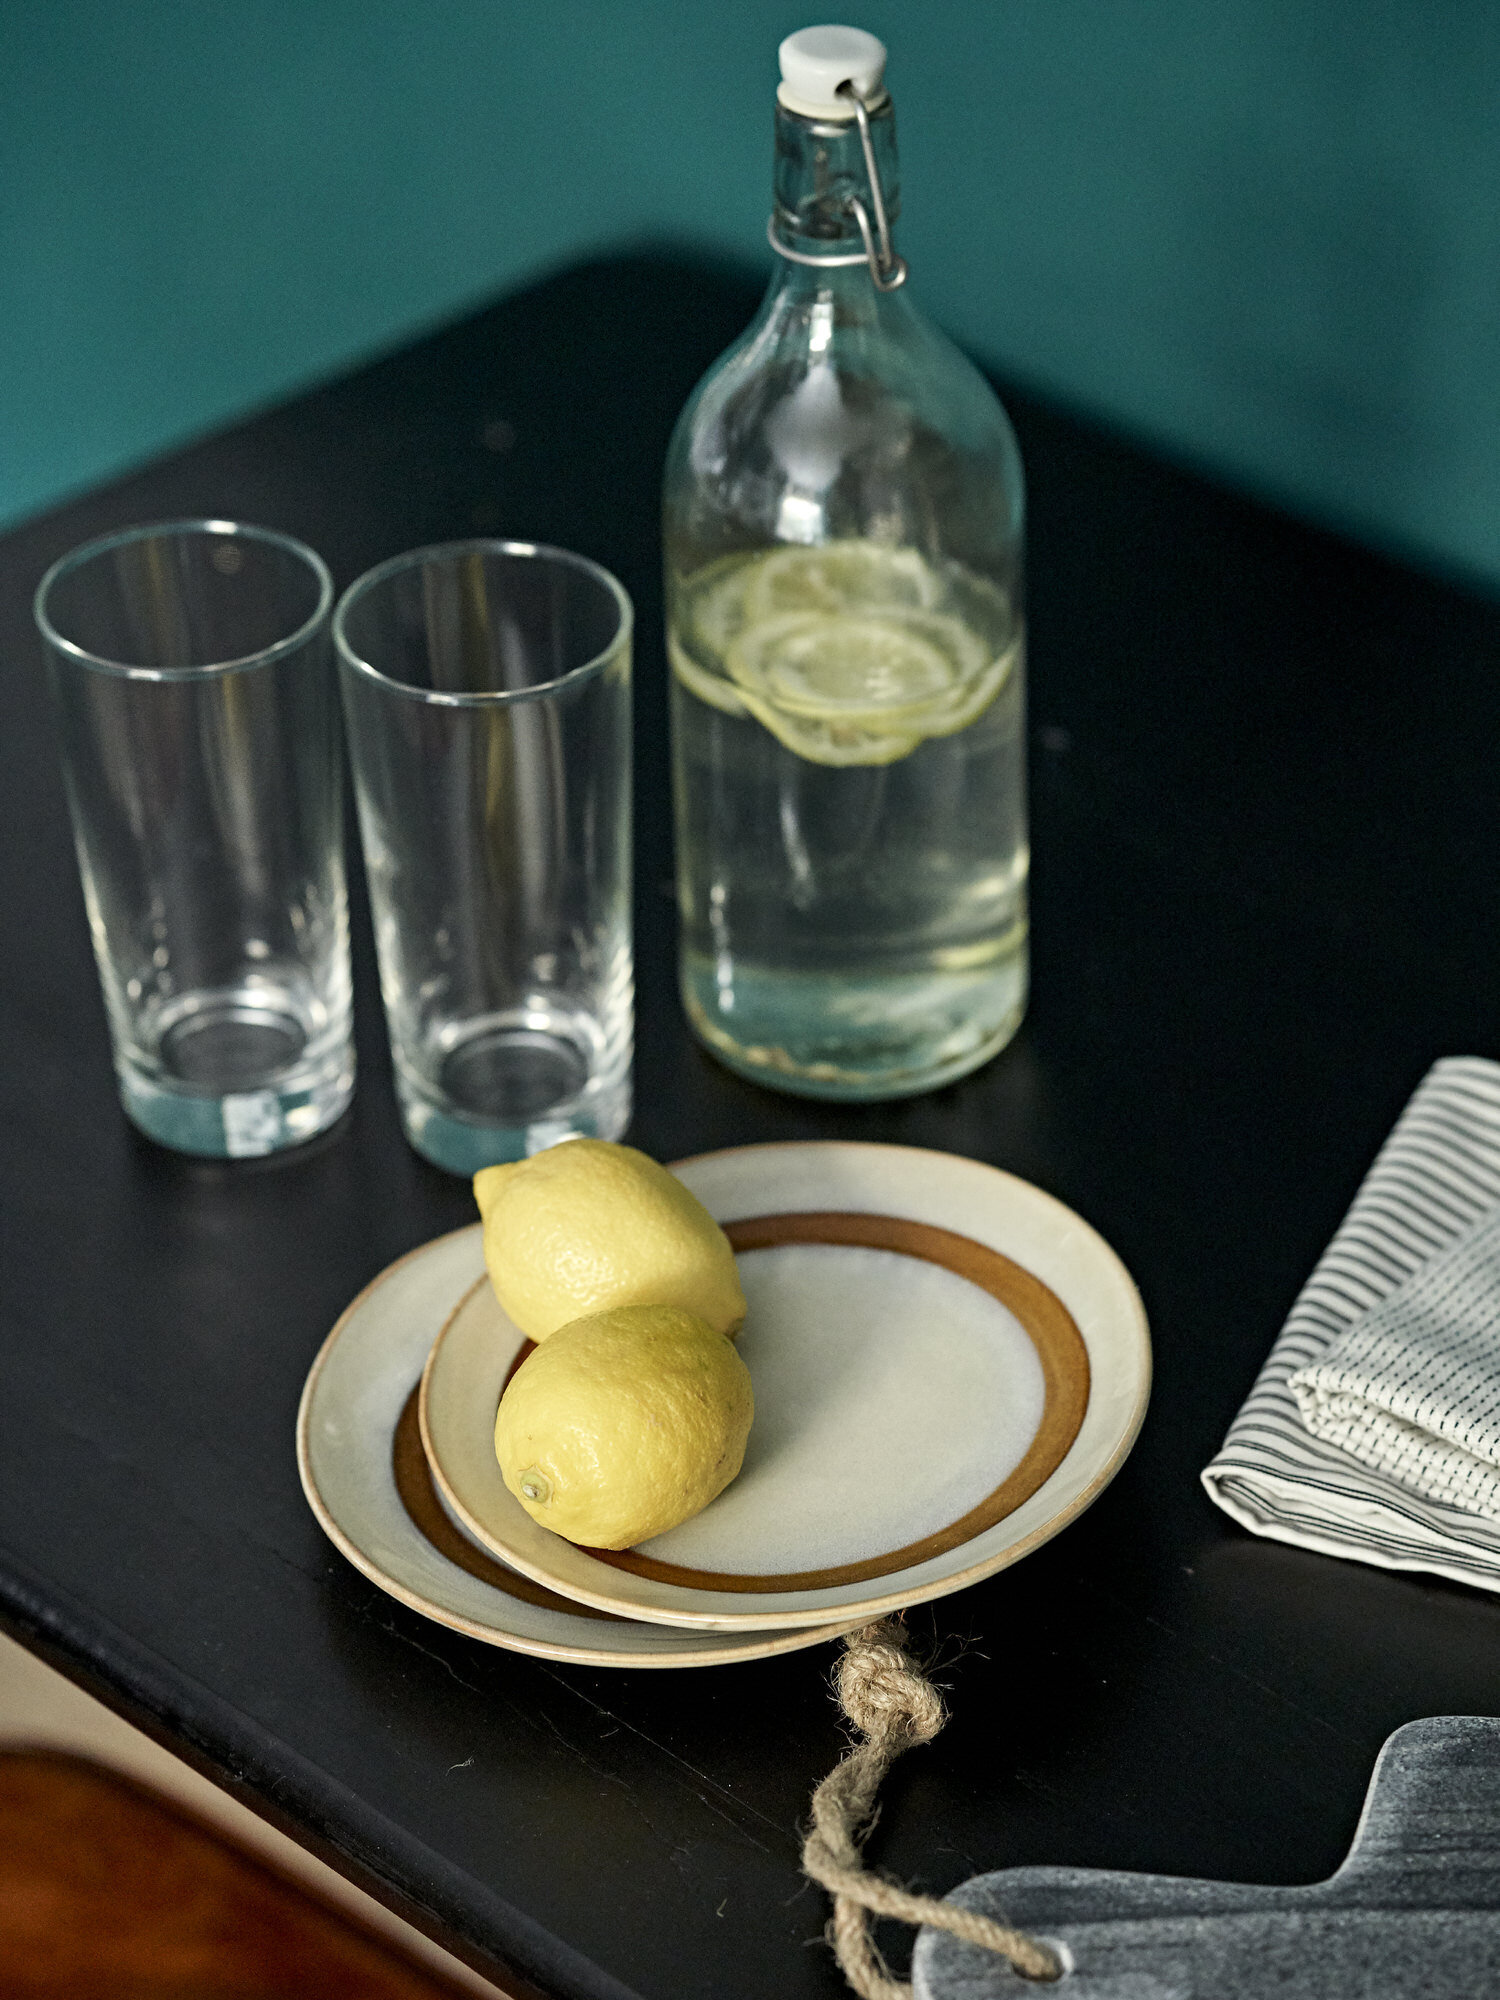 Lemons water and plates on black table